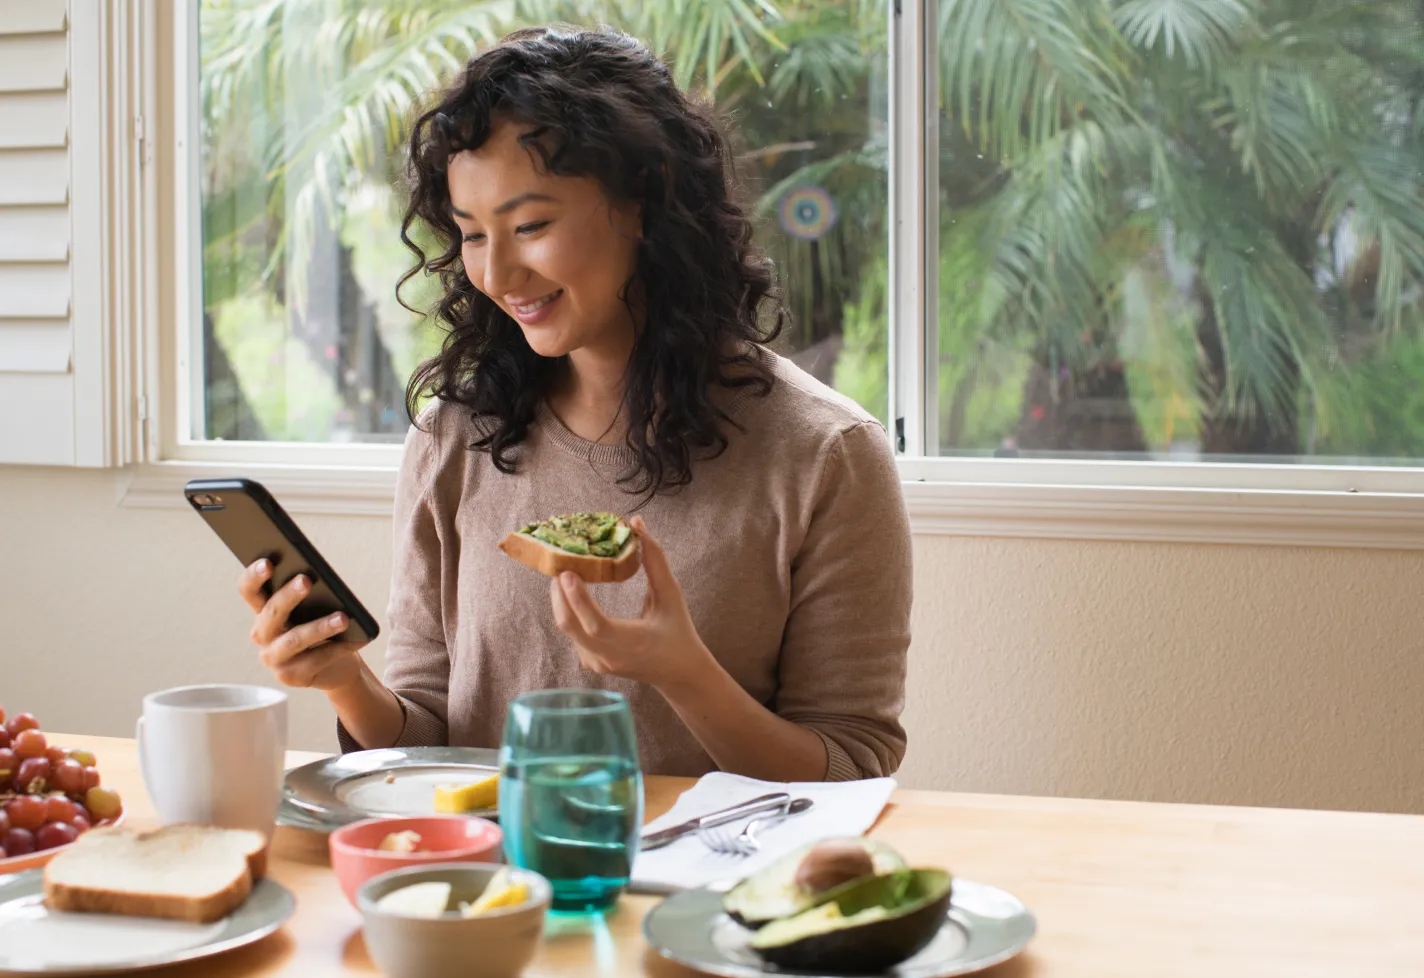 A young woman is sitting at the kitchen table eating avocado toast while looking at her smartphone. 